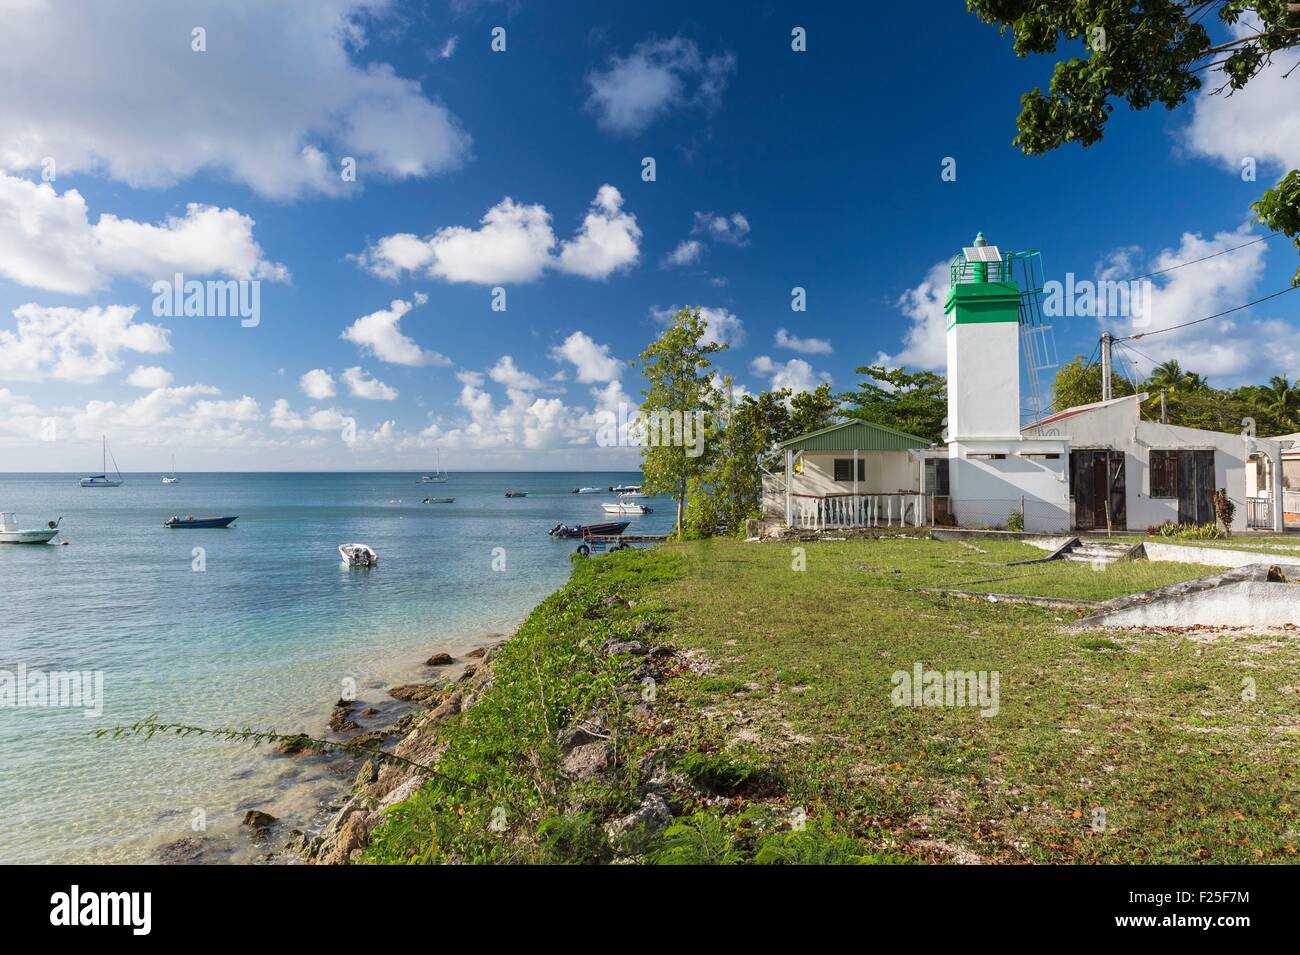 France, Guadeloupe (French West Indies), Marie Galante, Saint Louis, the lighthouse in the port Stock Photo